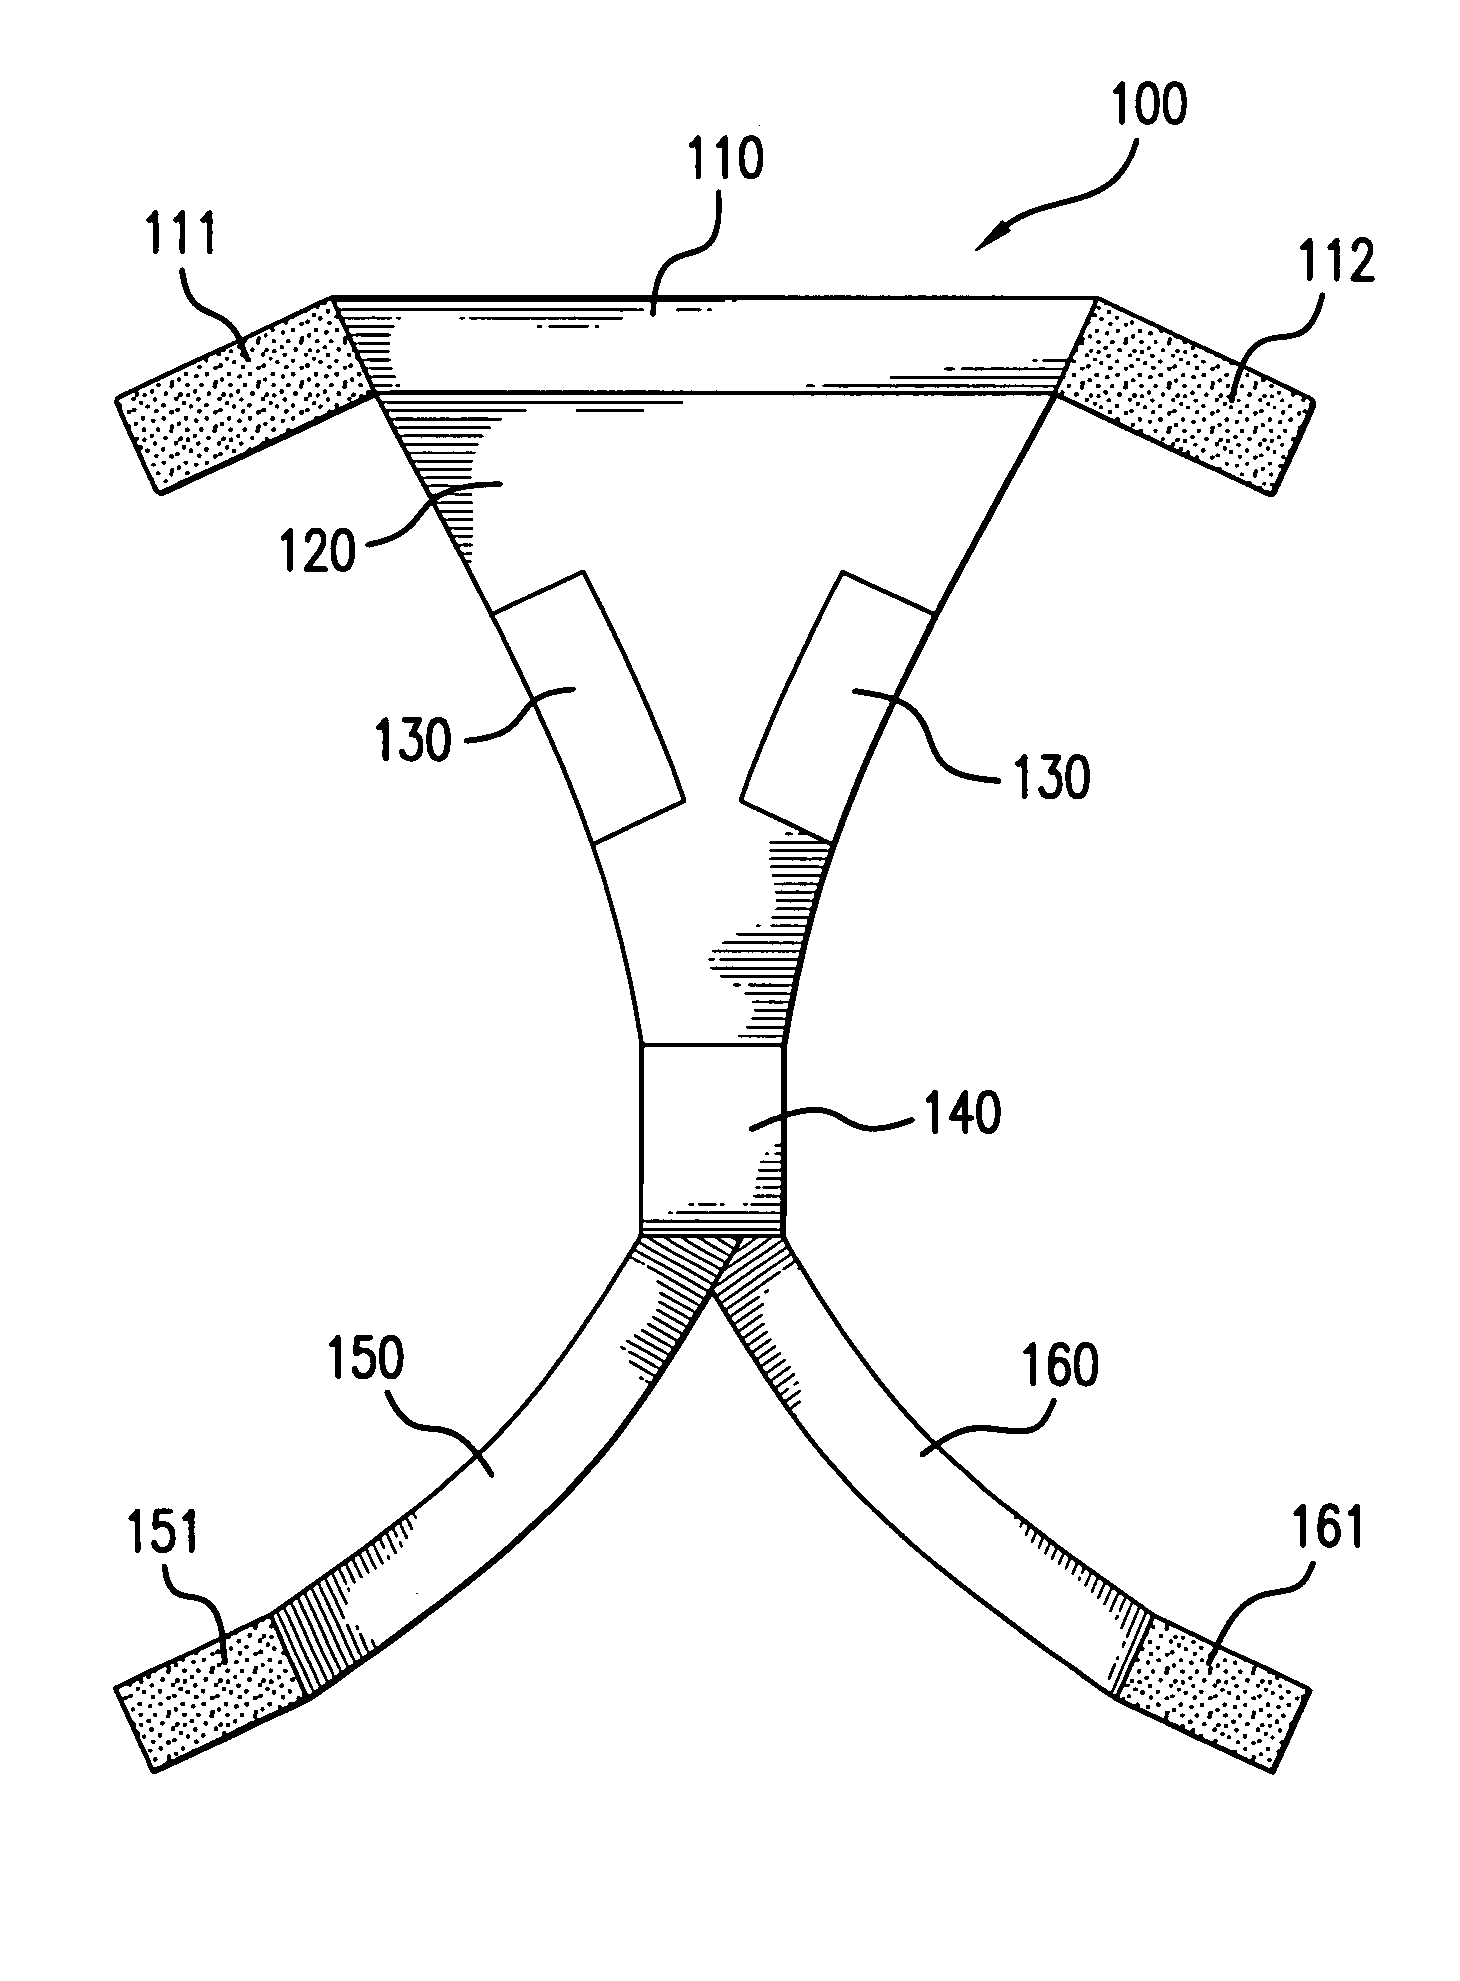 Methods and apparati for the close application of therapeutic and other devices to the pelvic area